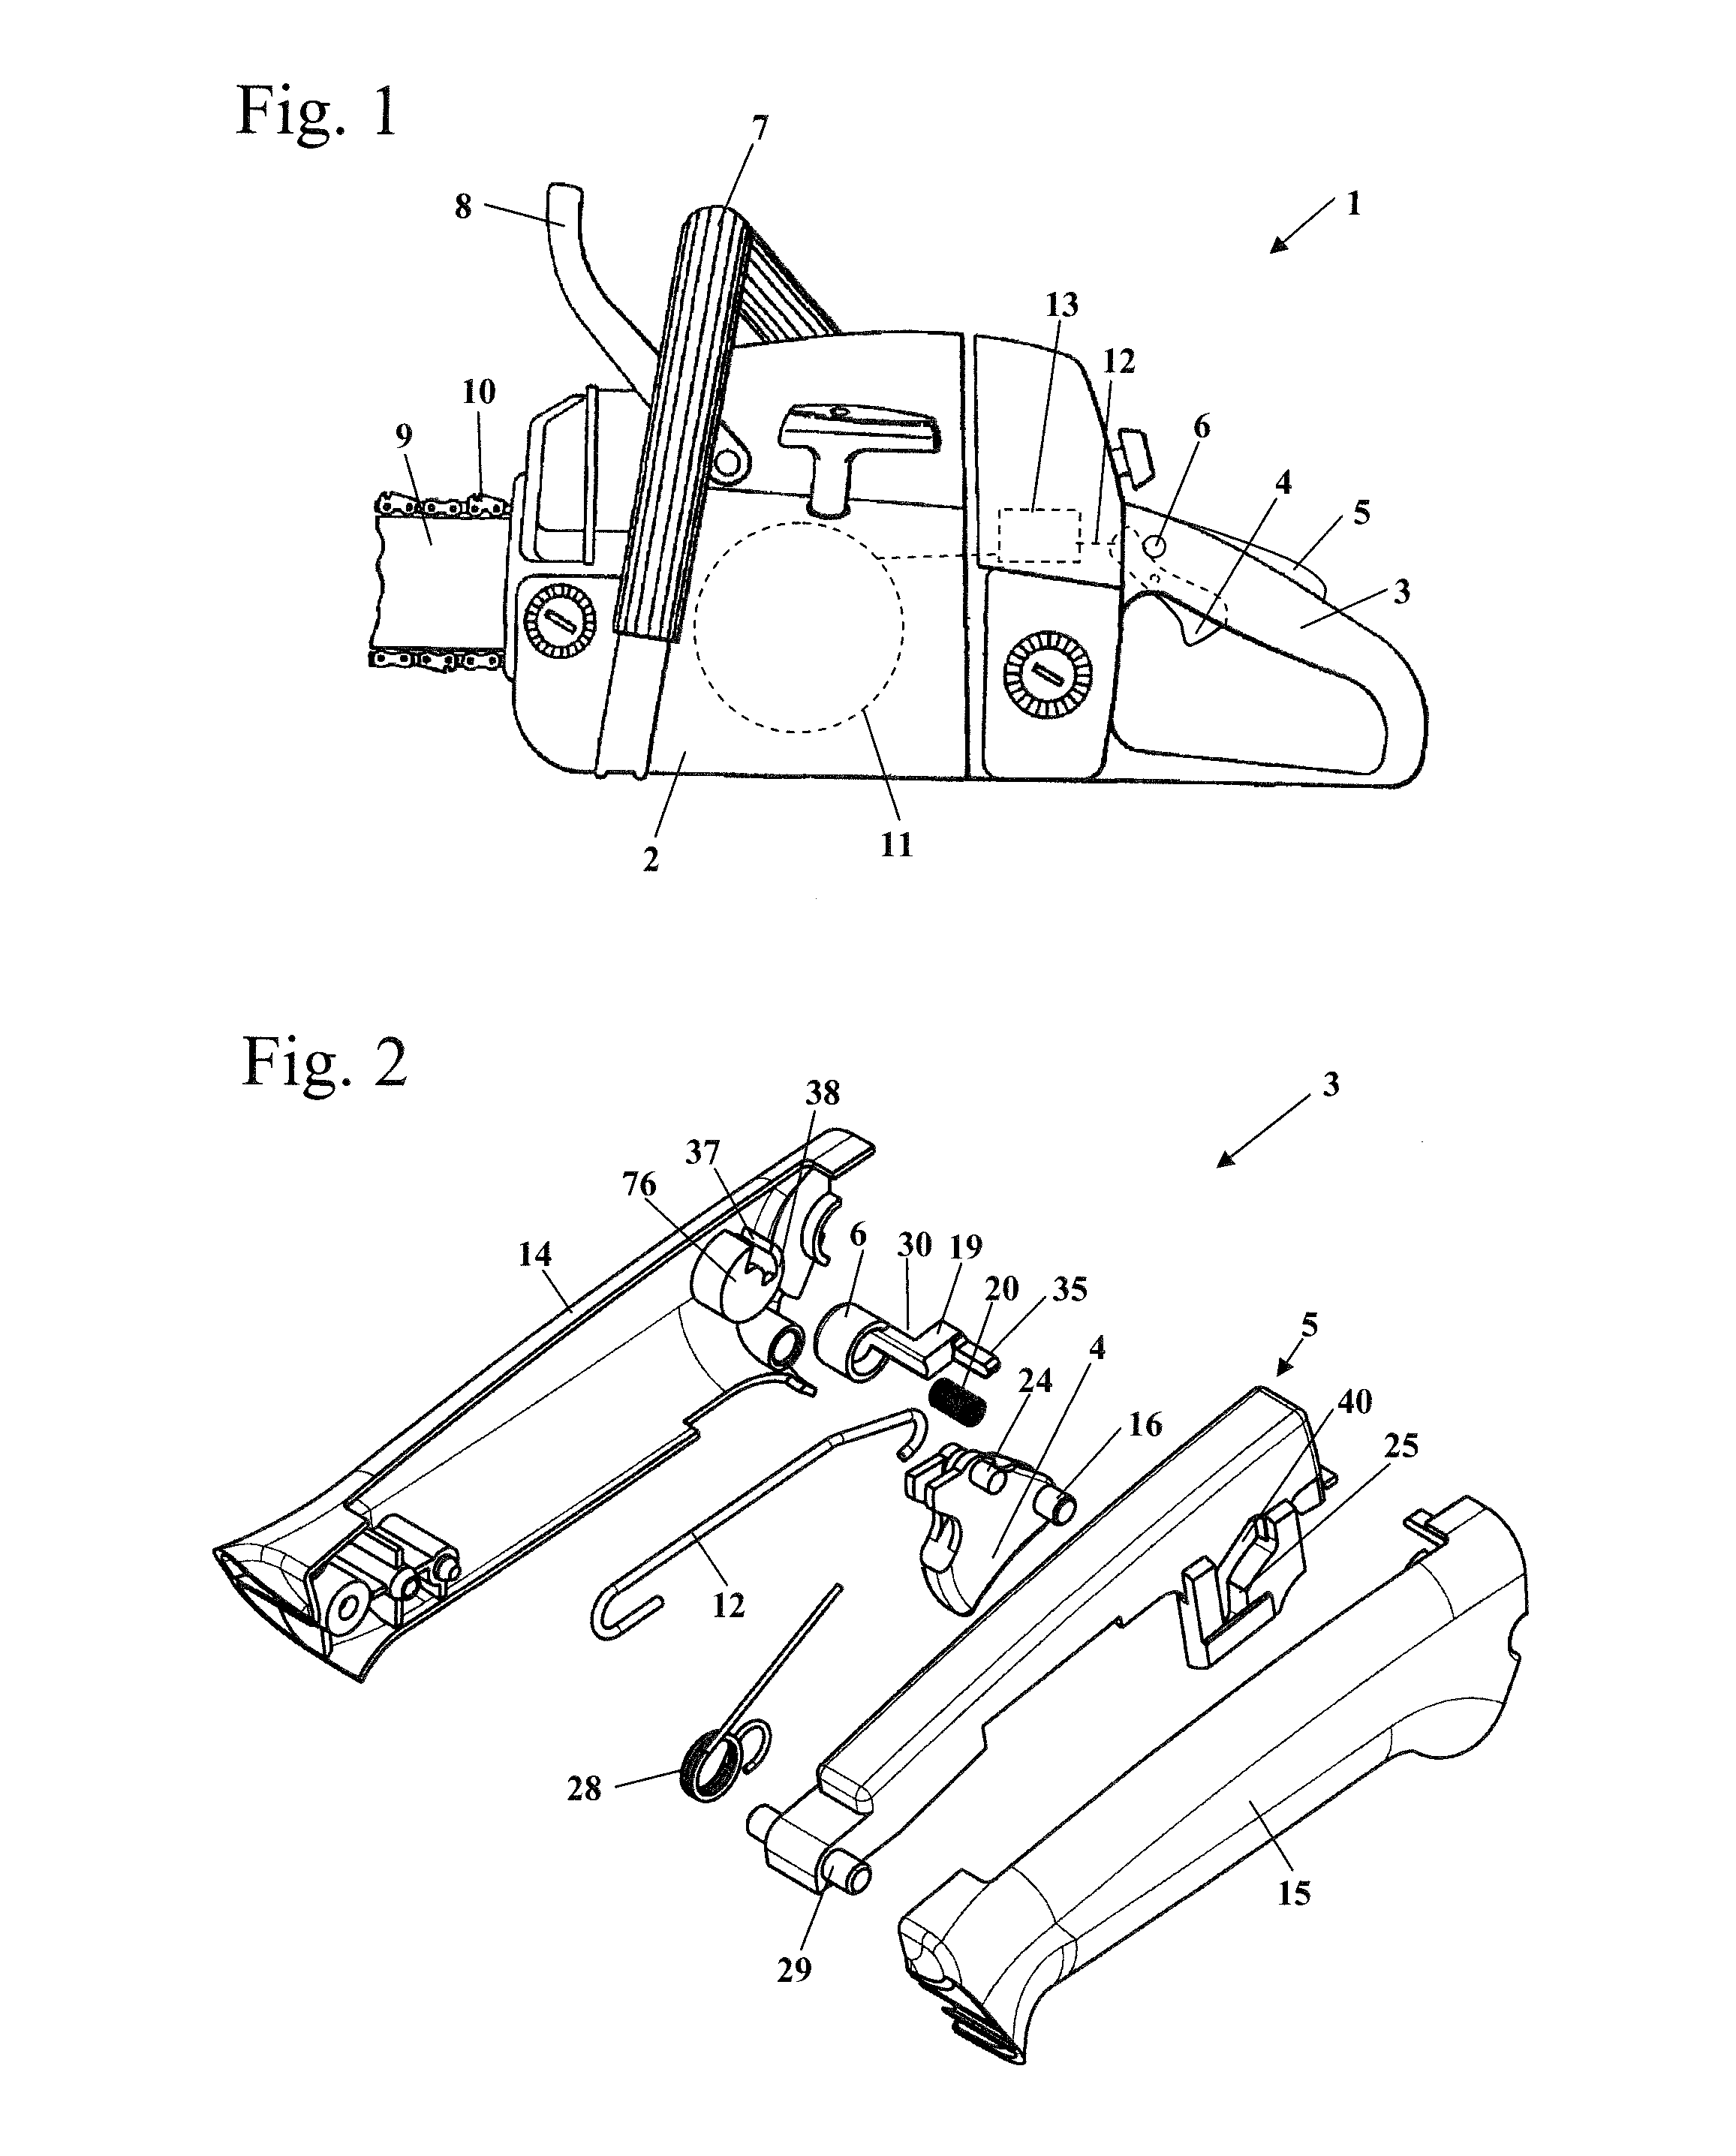 Handheld work apparatus having a drive motor for driving a work tool and method for operating said apparatus